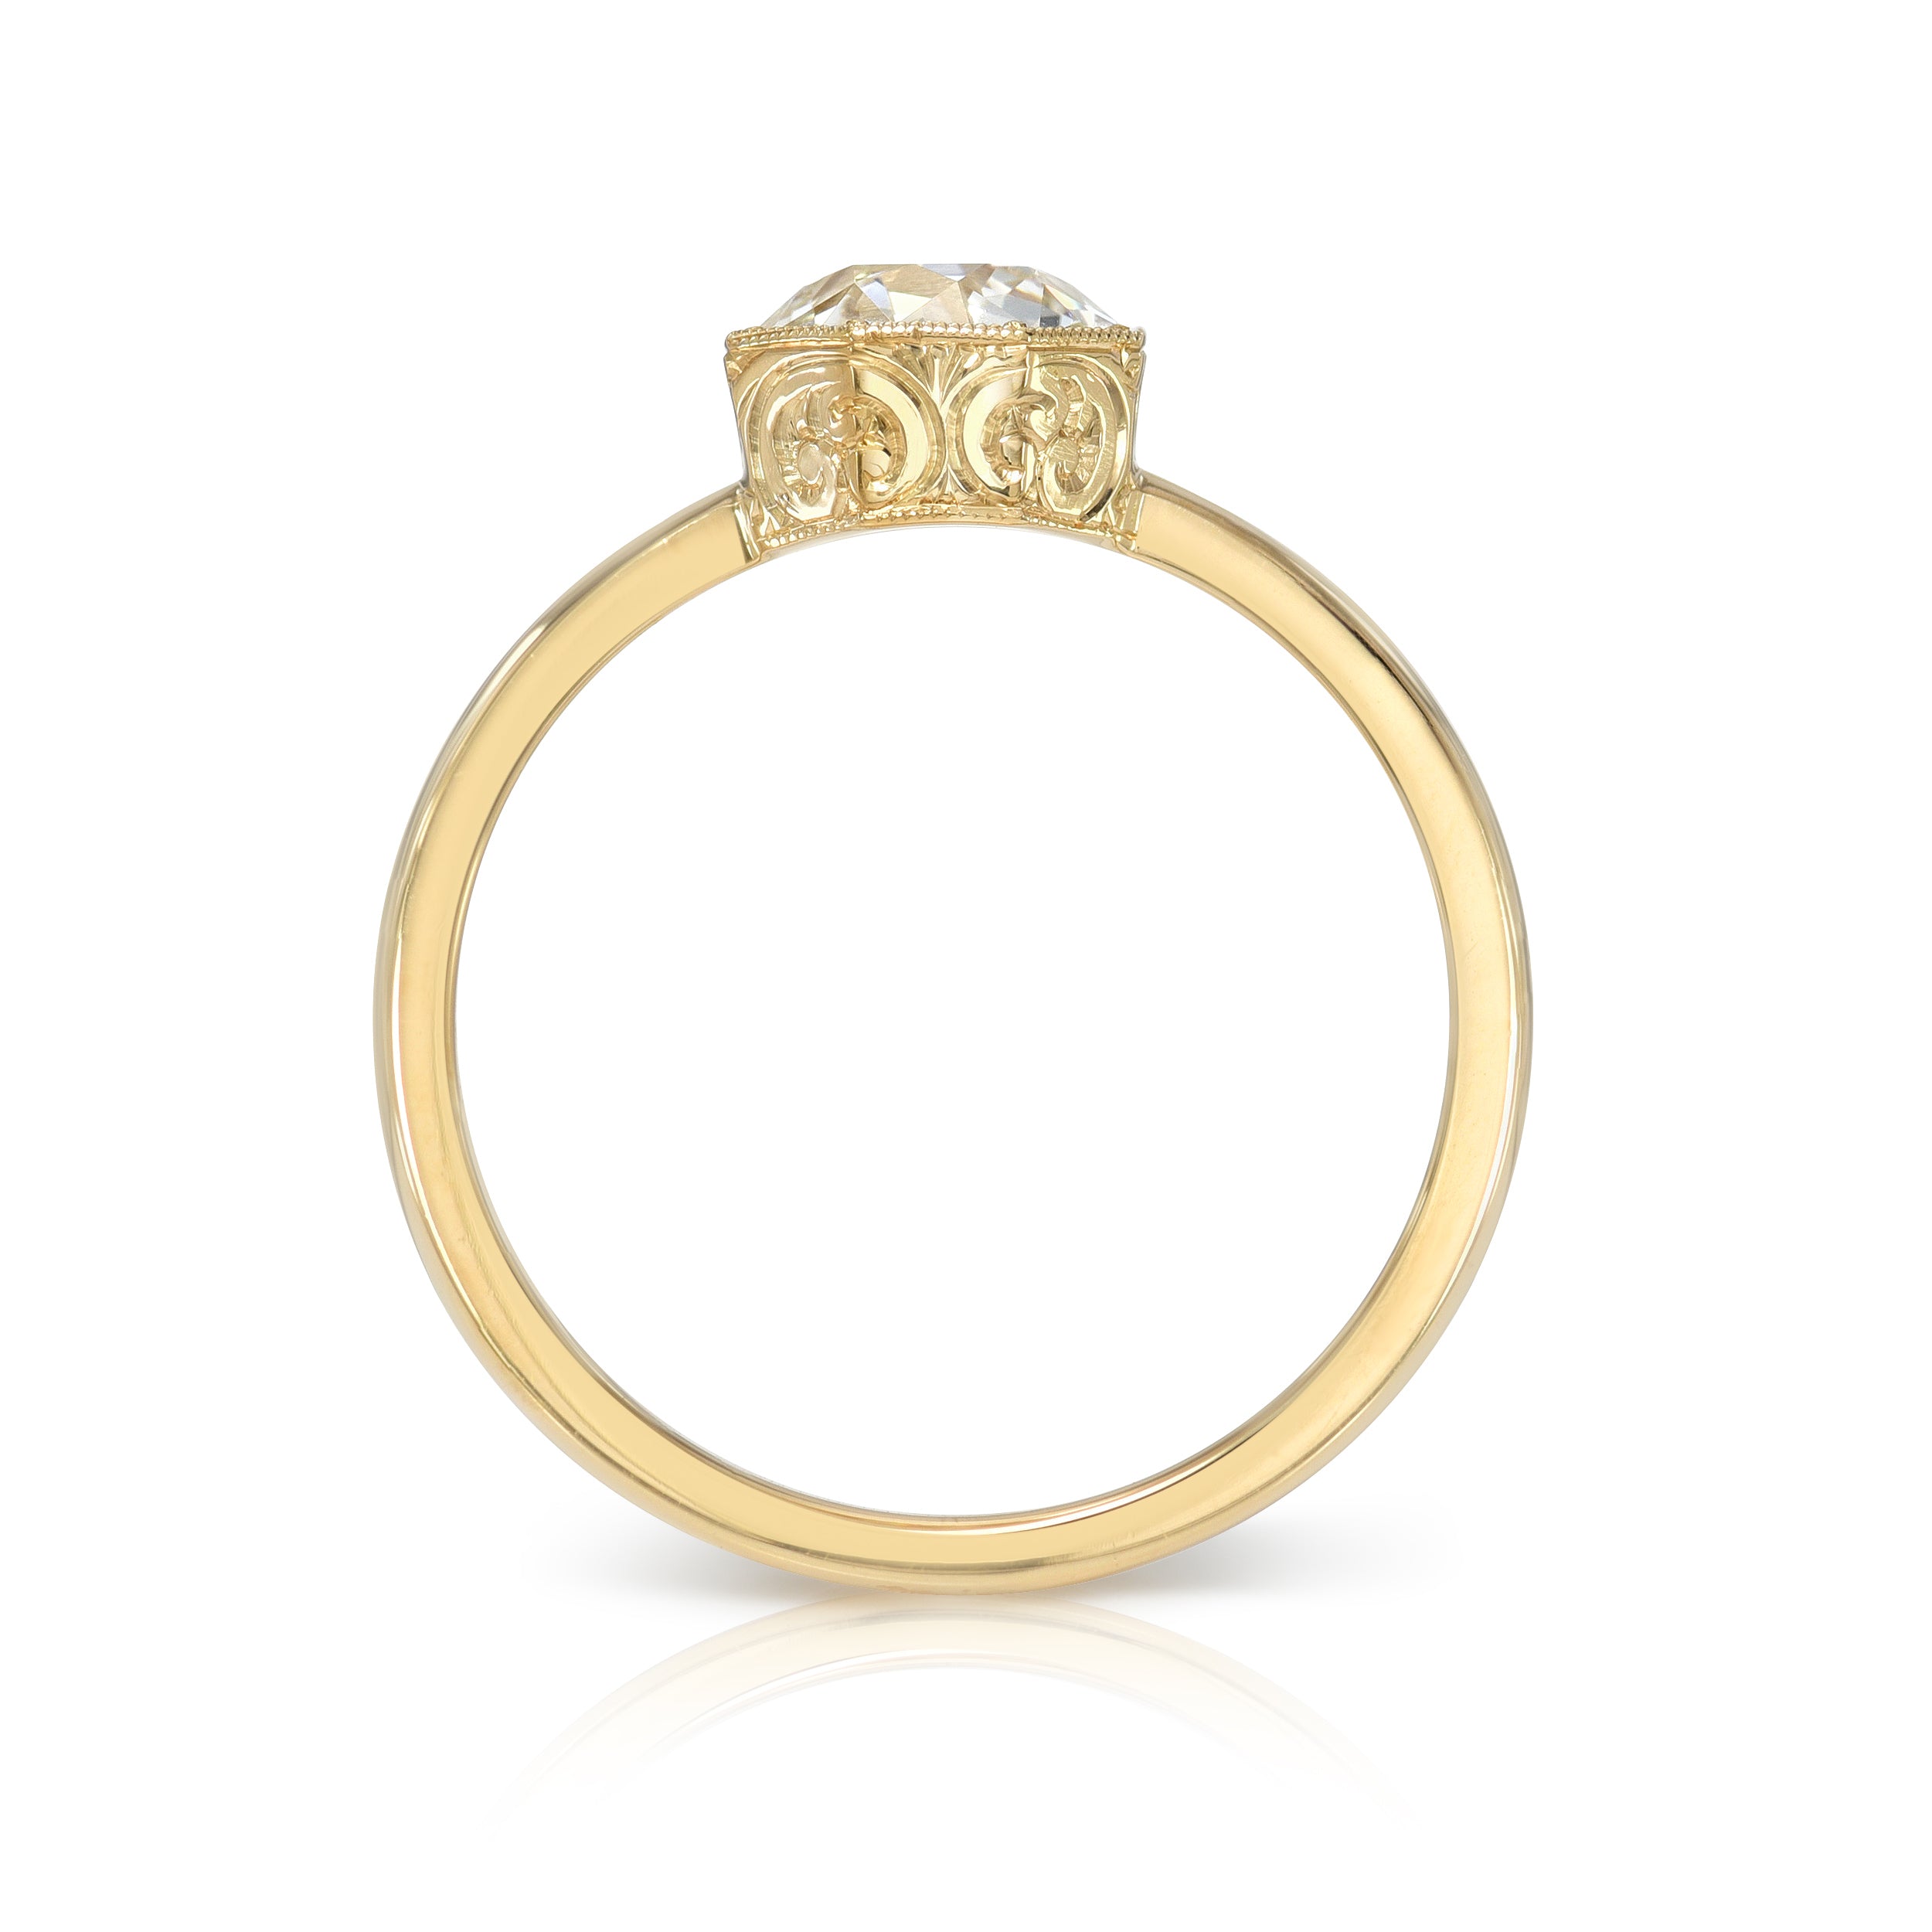 SINGLE STONE EMERSON ENGRAVED RING featuring 1.13ct J/SI1 GIA certified old European cut diamond prong set in a handcrafted, hand engraved 18K yellow gold mounting.